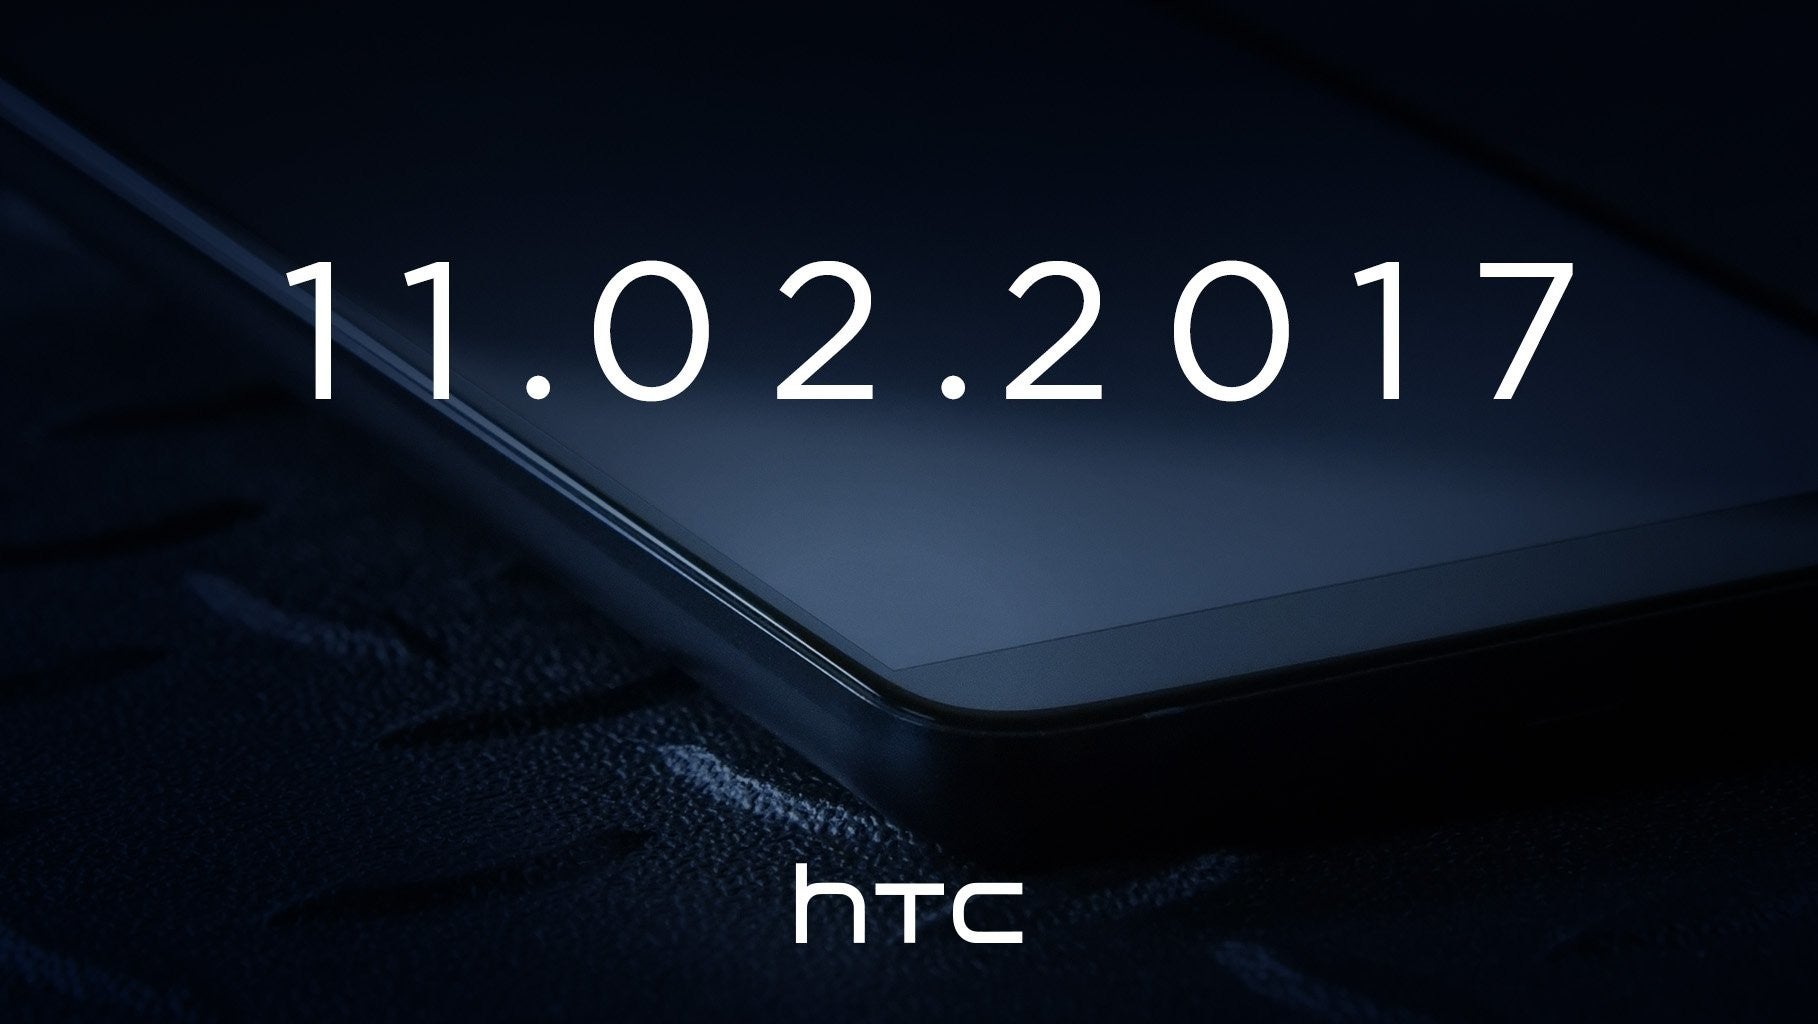 Another teaser shows the bezel-less display of the HTC U11+